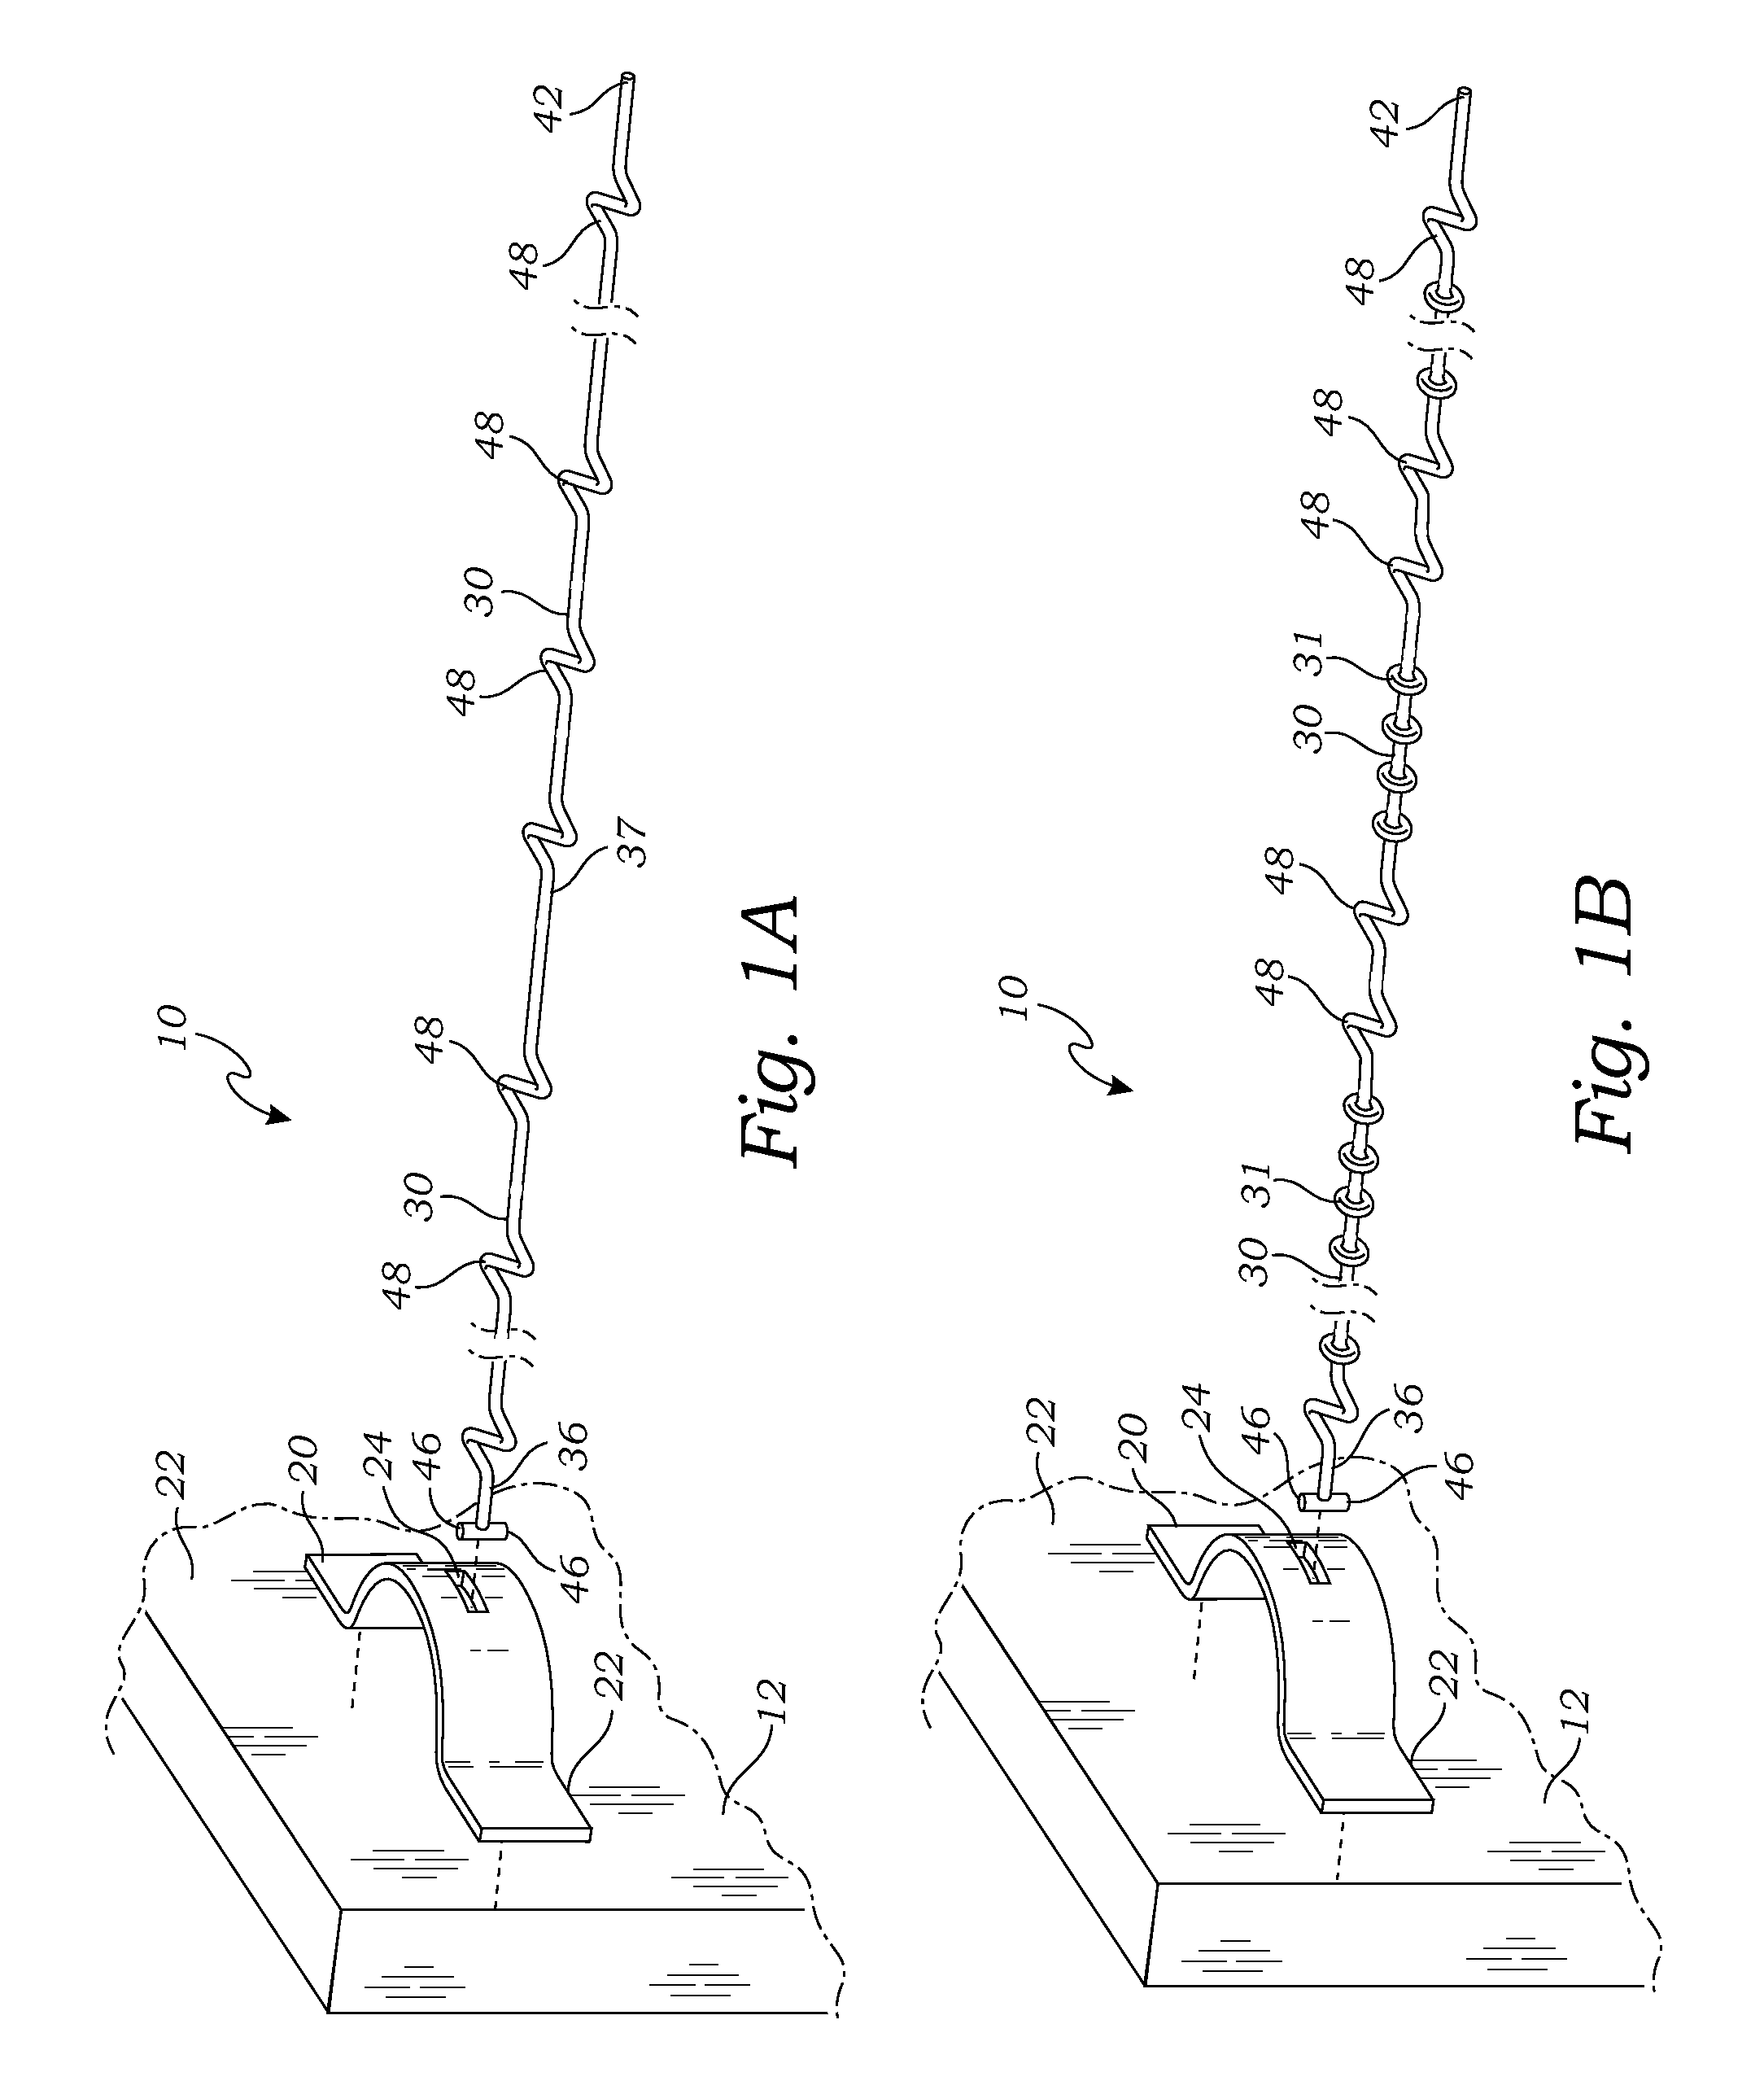 Method for constructing a mechanically stabilized earthen embankment using semi-extensible steel soil reinforcements